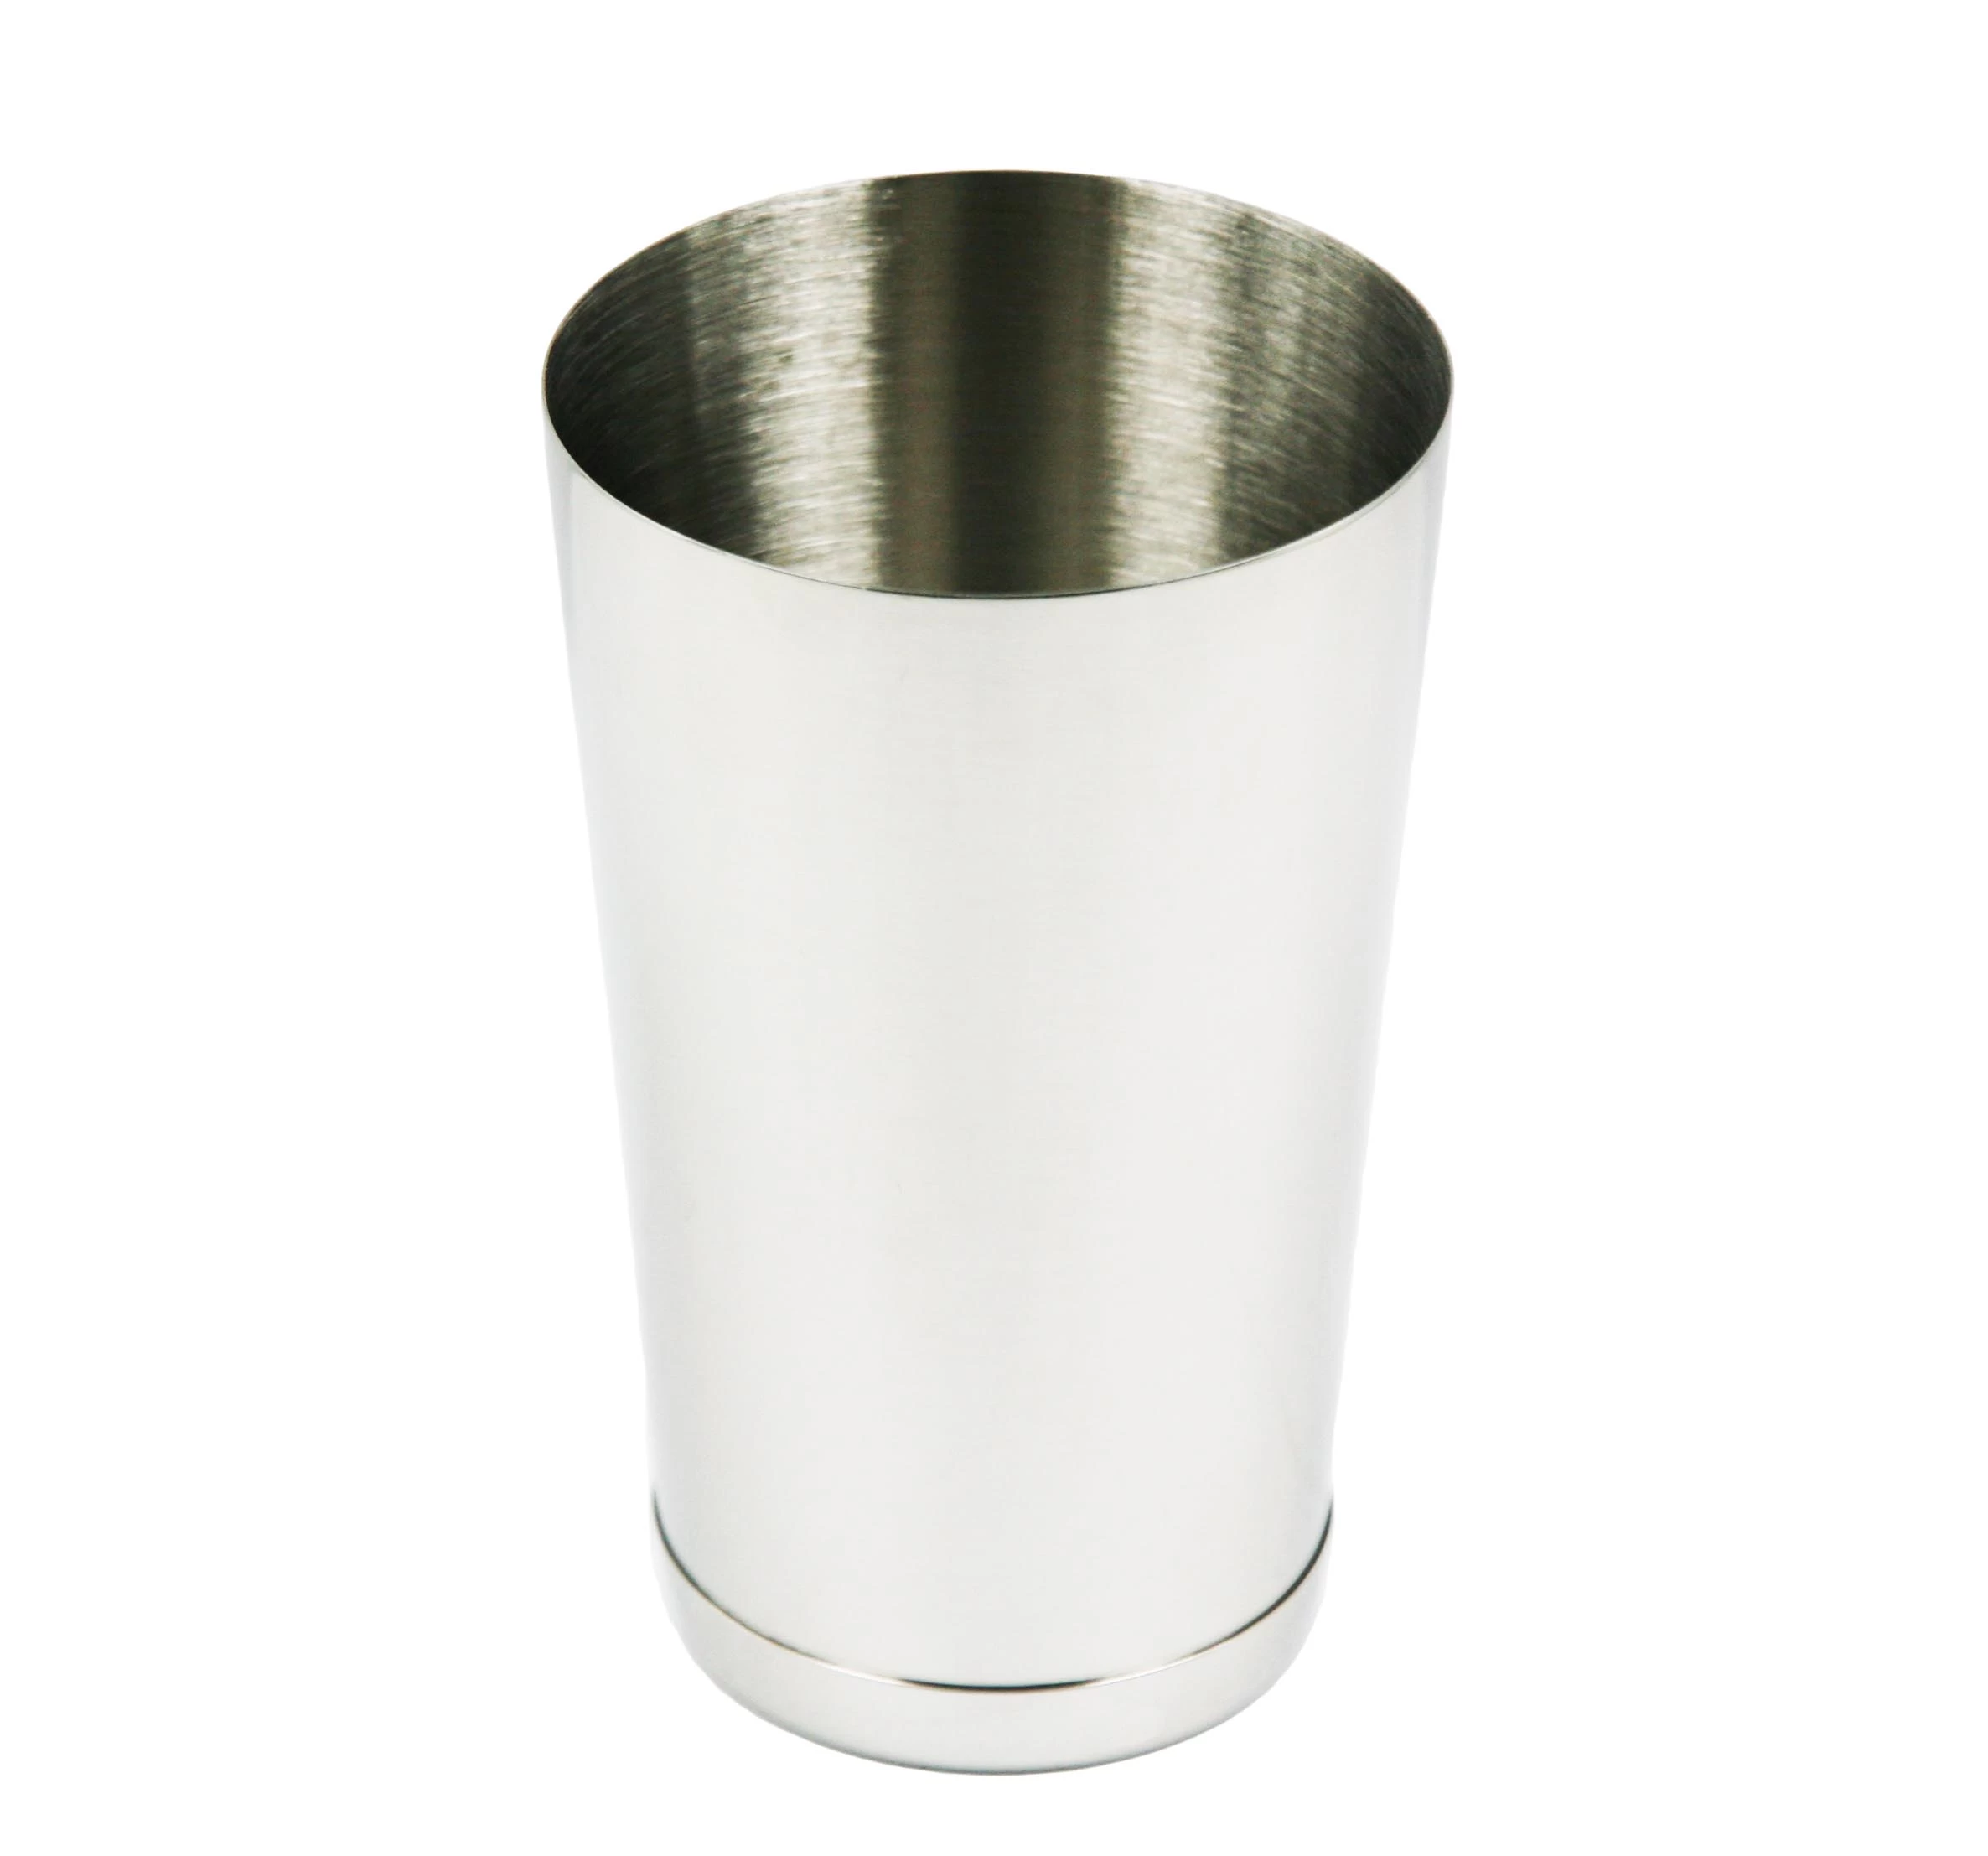 Stainless steel Boston Cocktail Shaker Boston Cup EB-B65